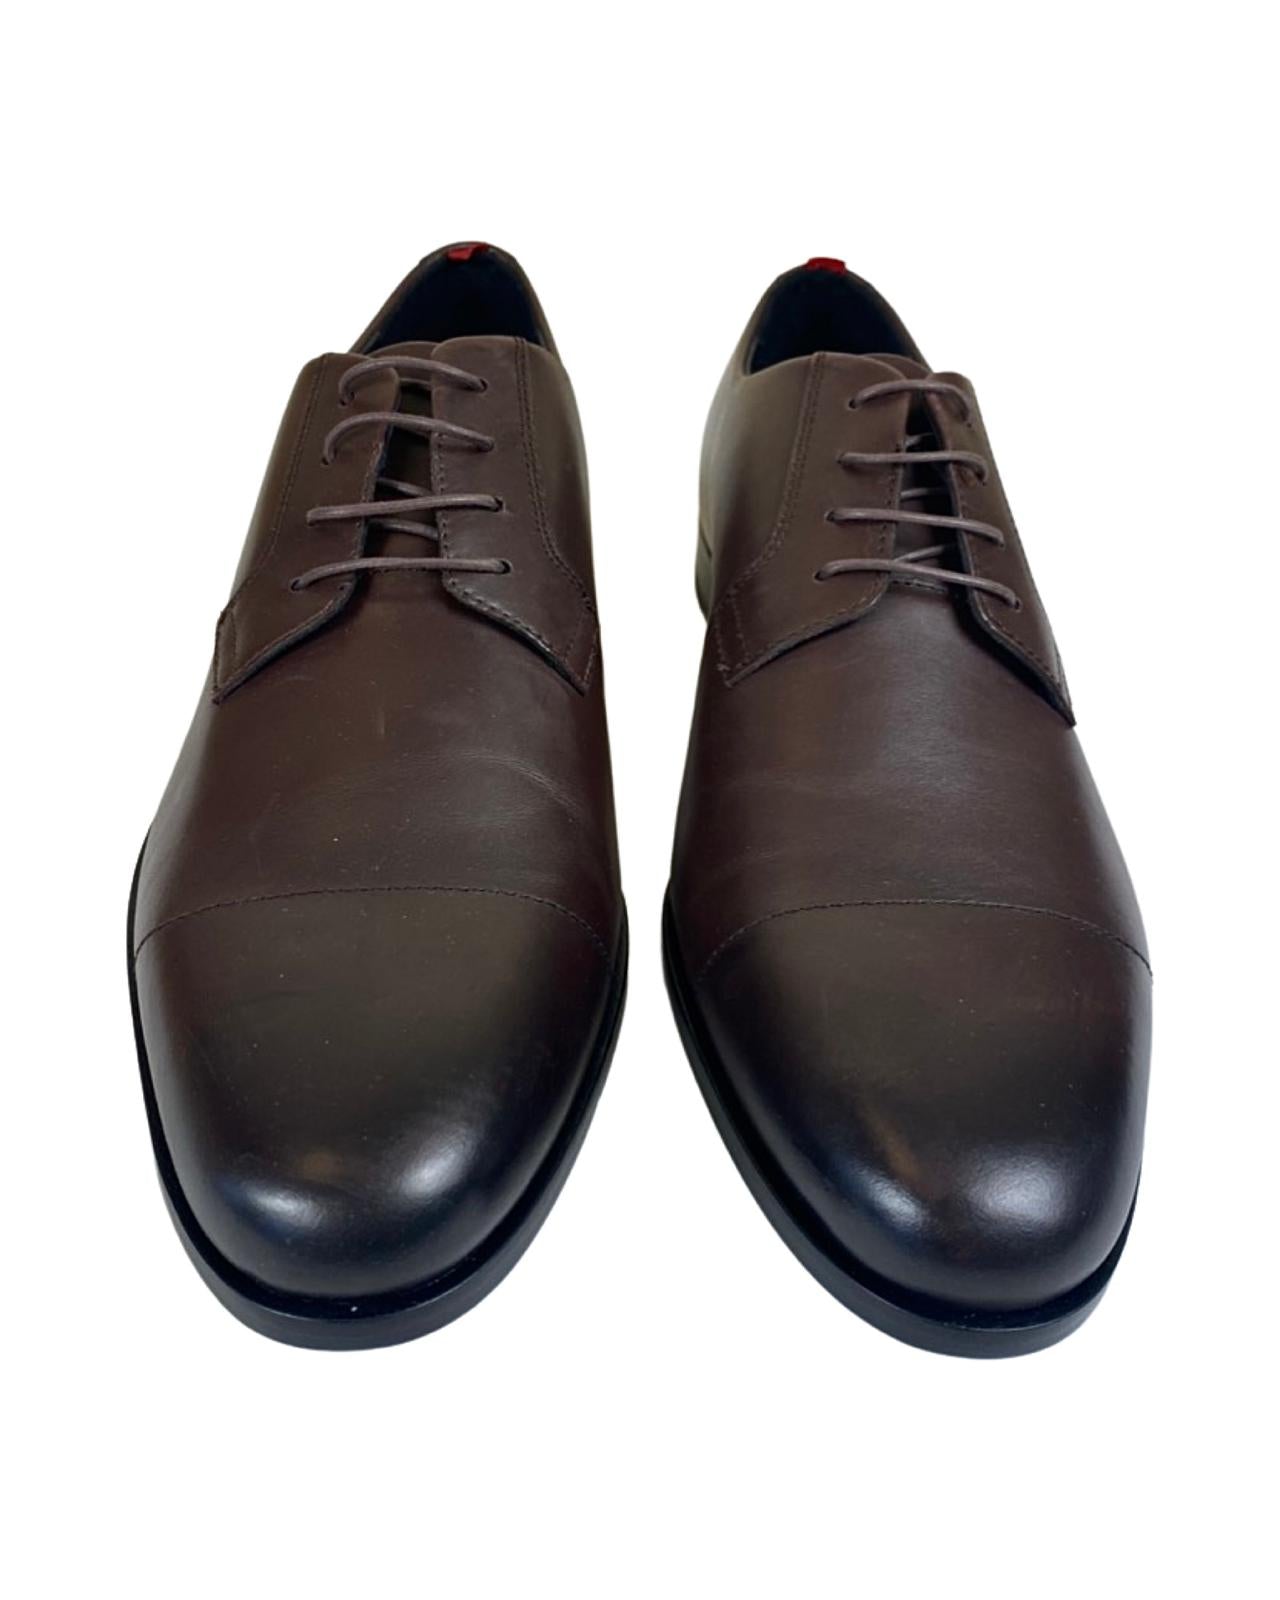 Hugo Boss Vero Cuoio Brown Leather Formal Shoes UK 10-The Freperie